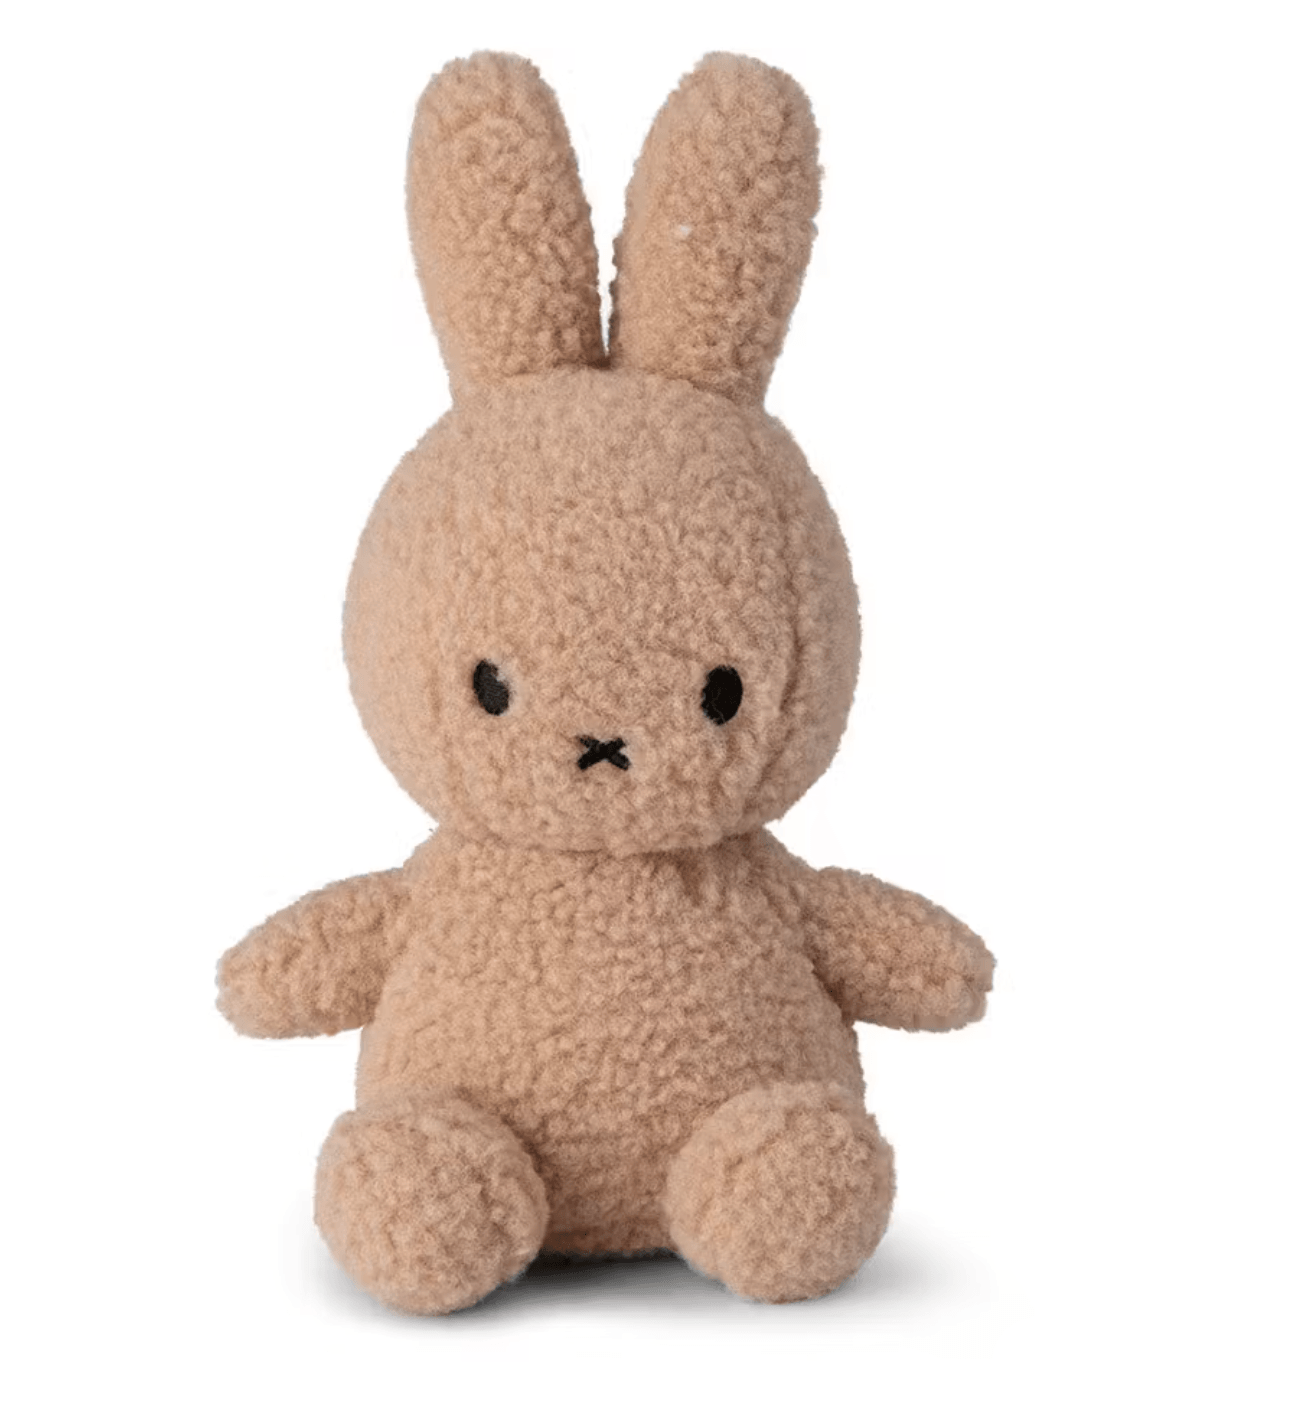 files/miffy-100percent-recycled-teddy-beige-23-cm-claybearofficial.png